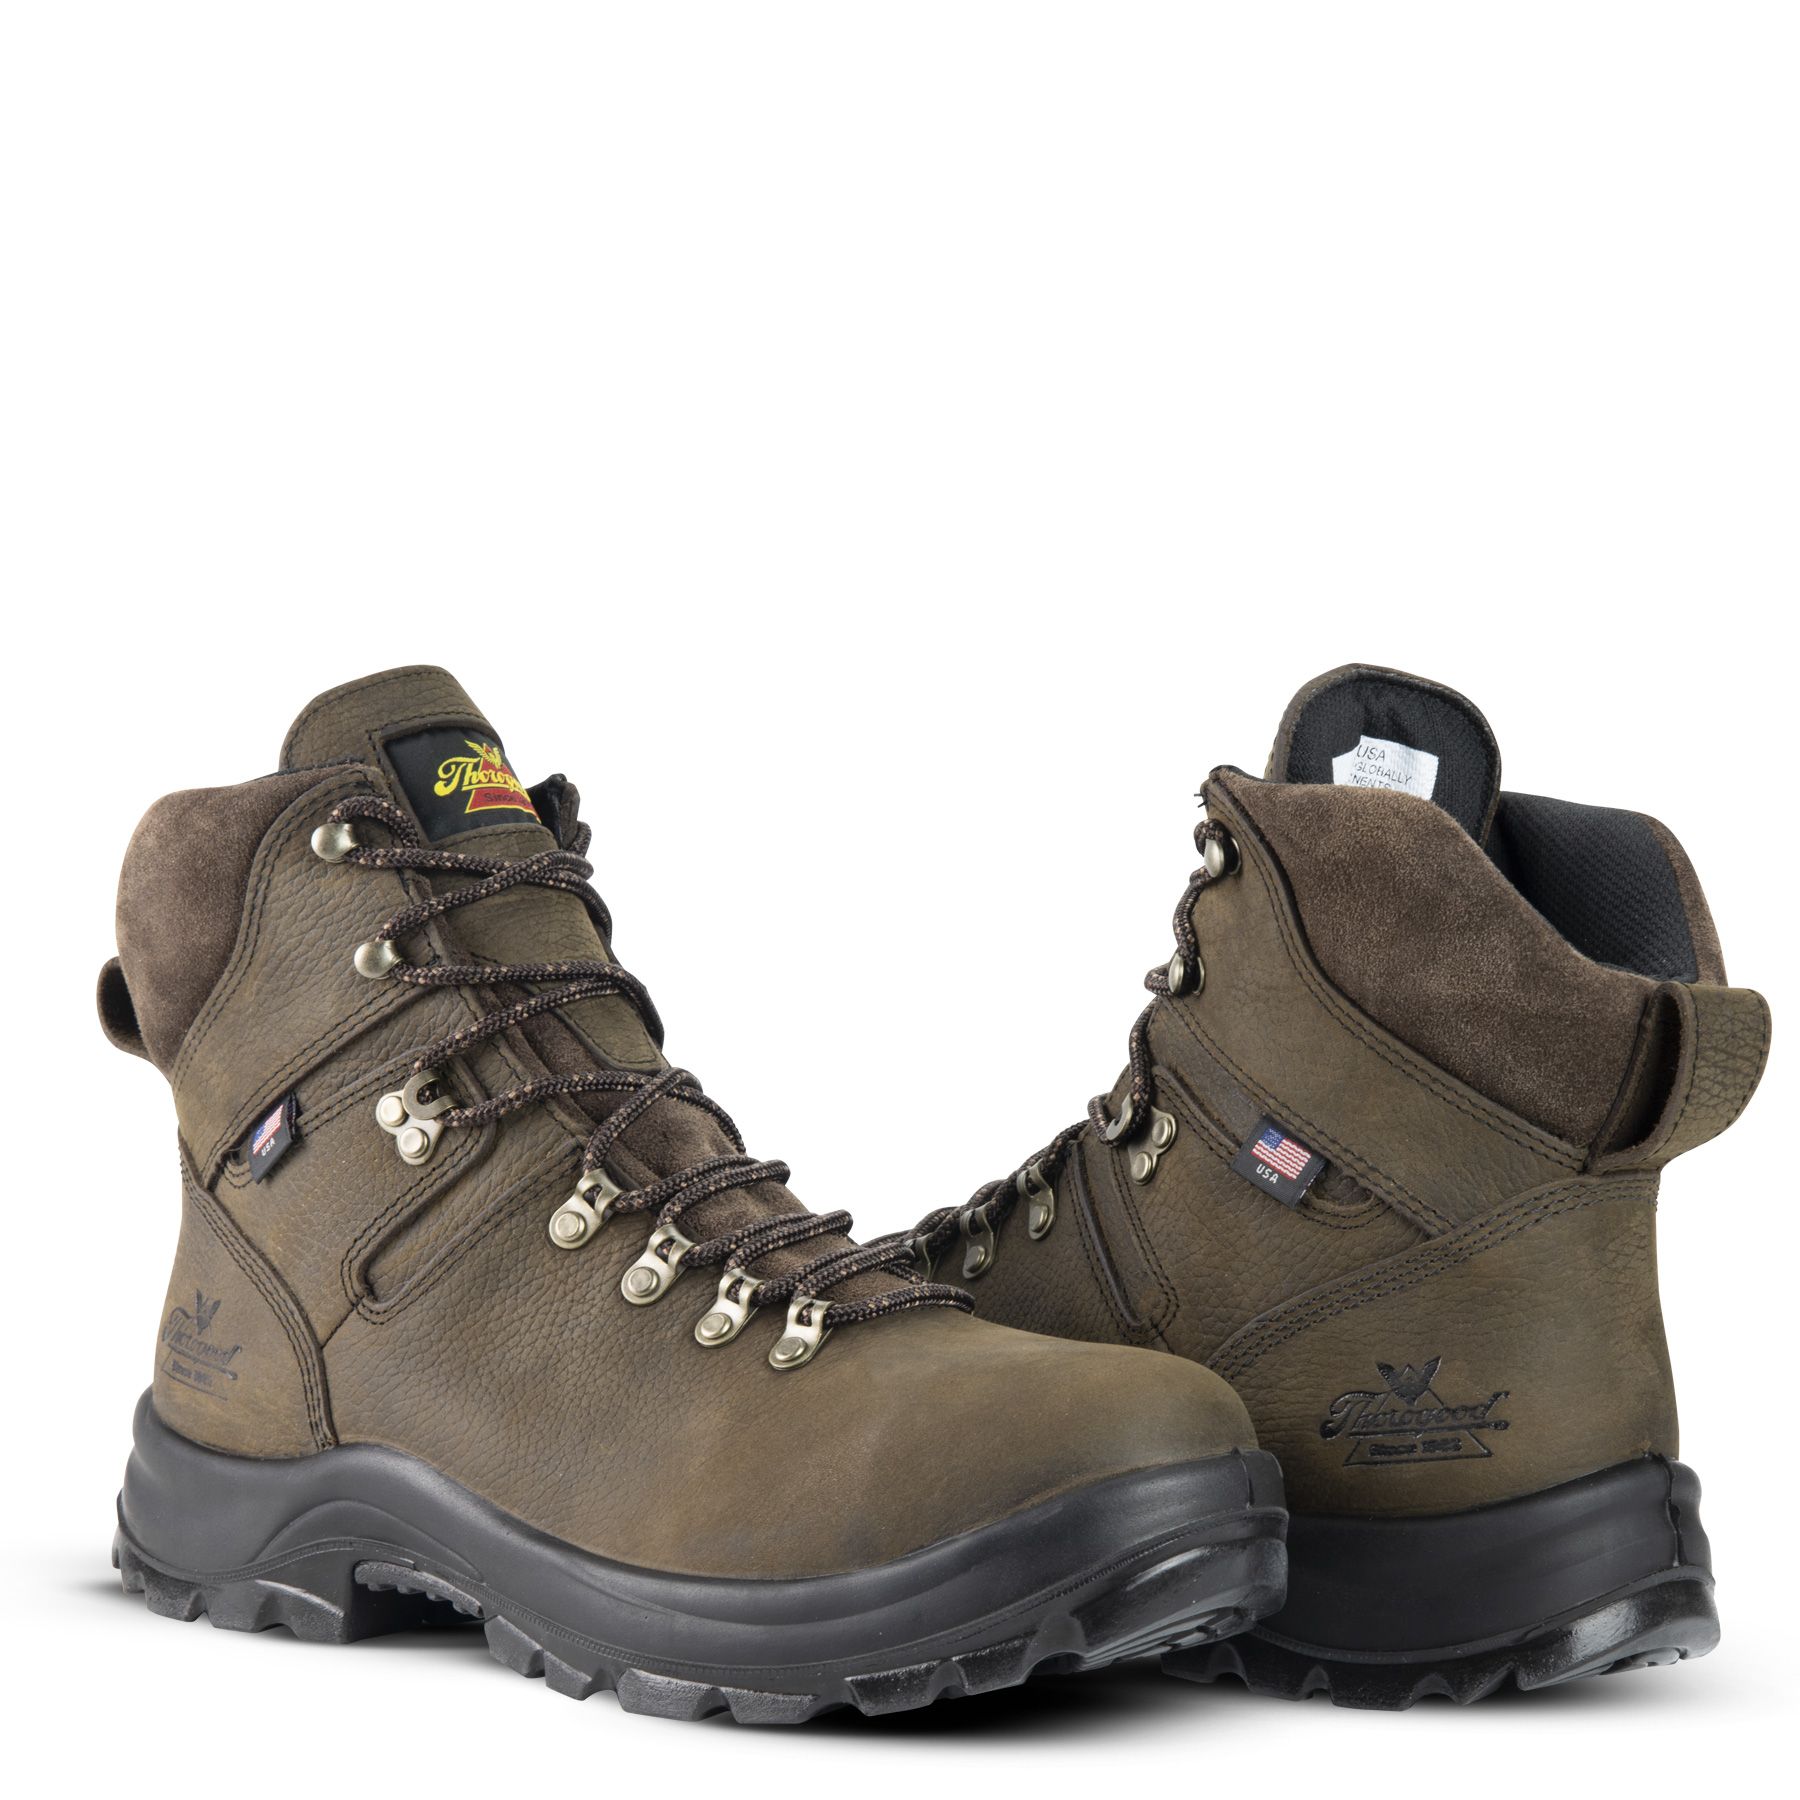 Thorogood American Union Series Waterproof 6 Inch Brown Steel Toe Work Boots from Columbia Safety